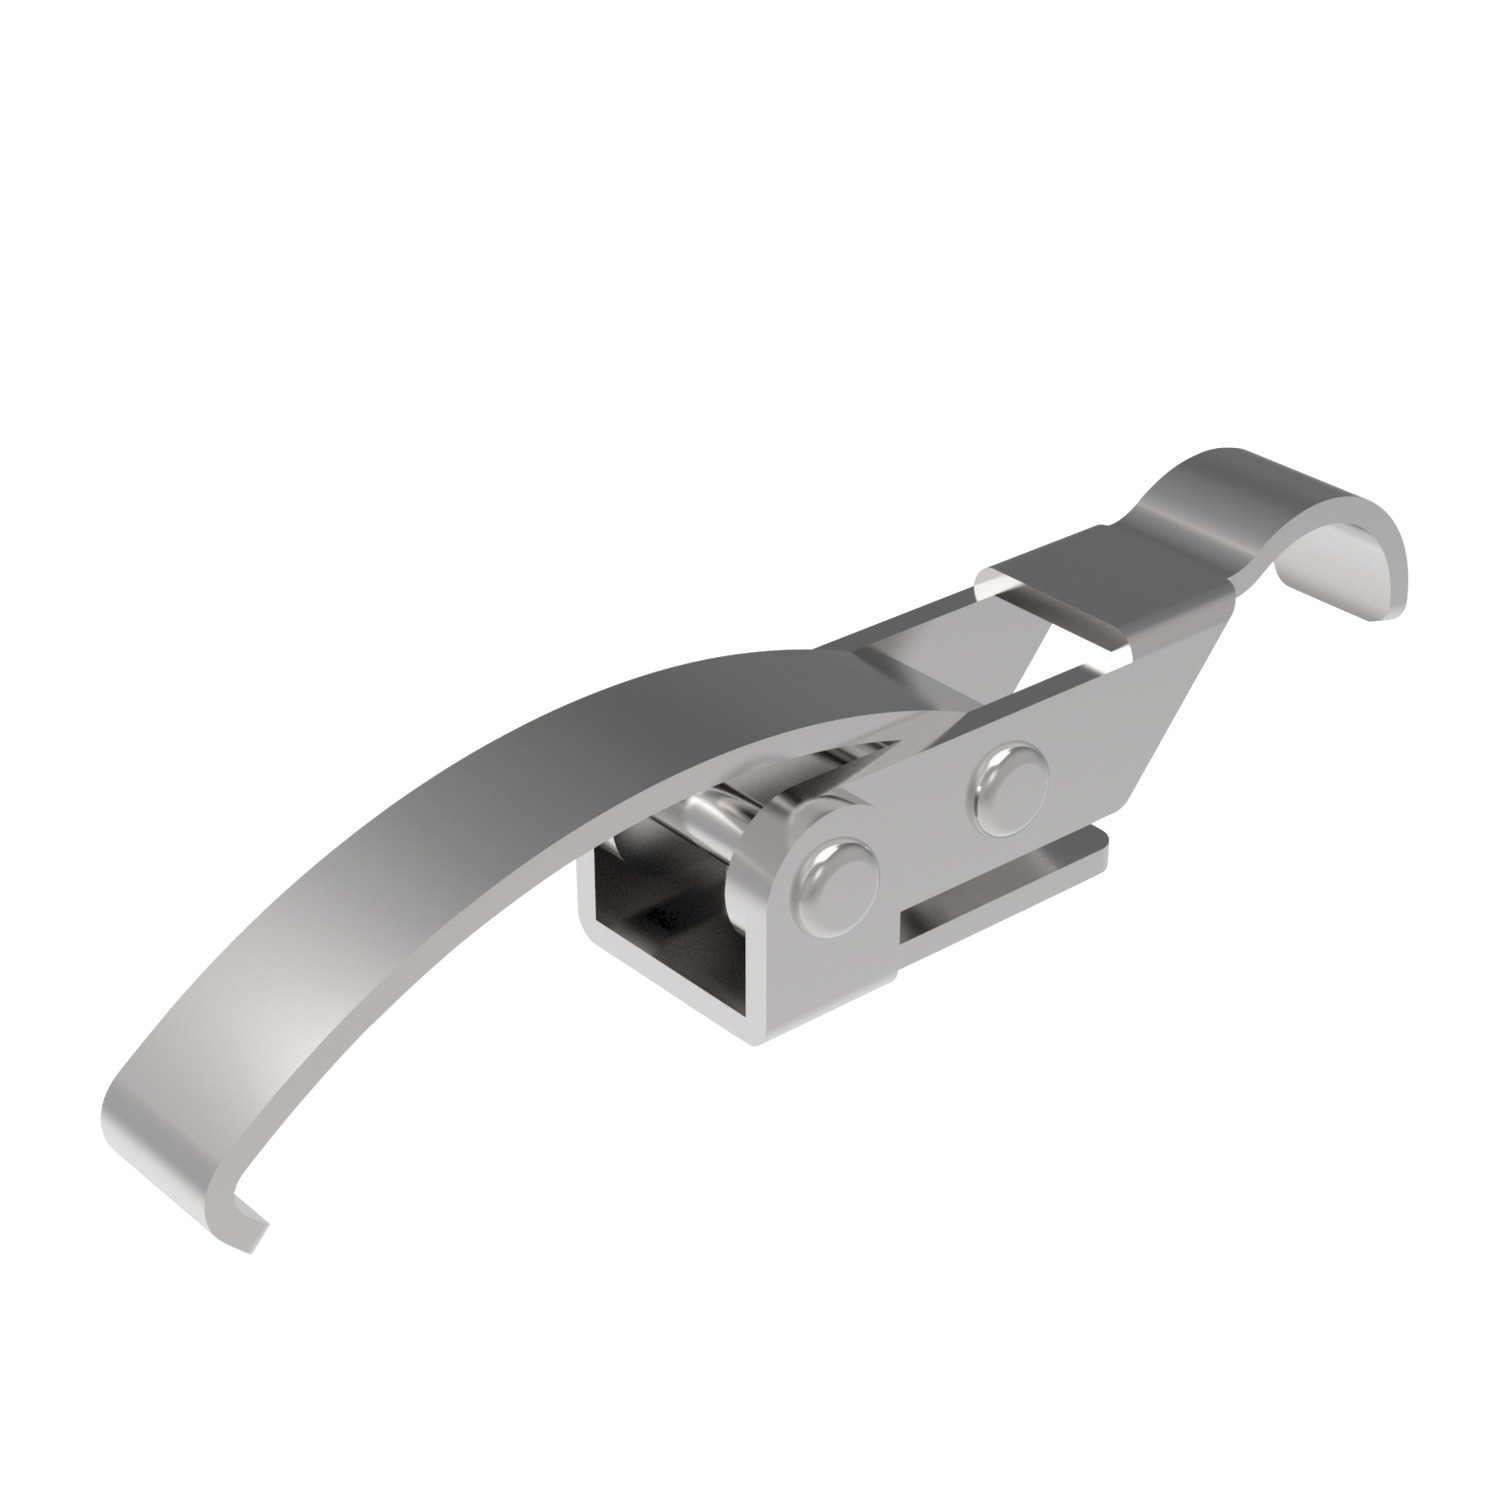 J0556.AC0004 Toggle Latches Zinc Plated Steel - 90 - 17 - 17